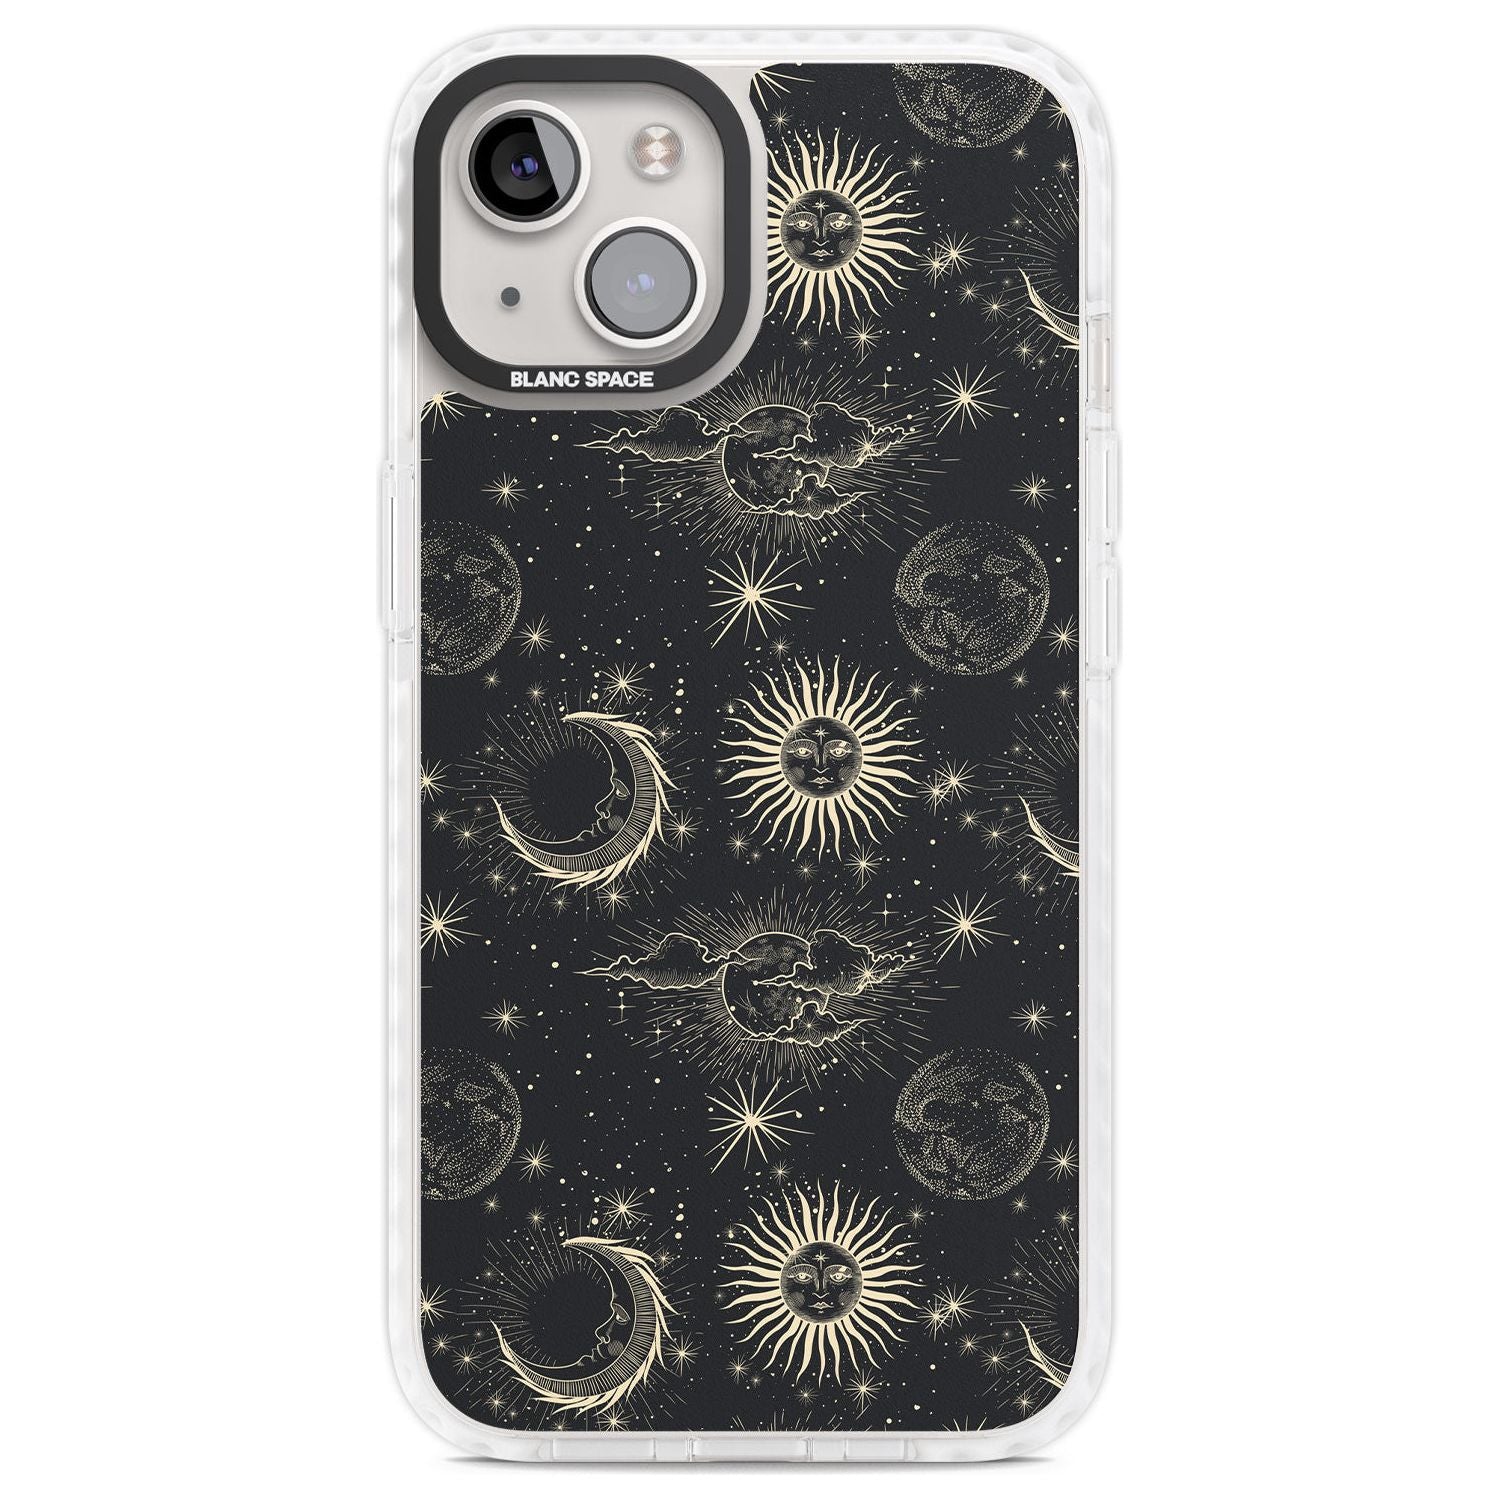 Large Suns, Moons & Clouds Astrological Phone Case iPhone 13 / Impact Case,iPhone 14 / Impact Case,iPhone 15 Plus / Impact Case,iPhone 15 / Impact Case Blanc Space